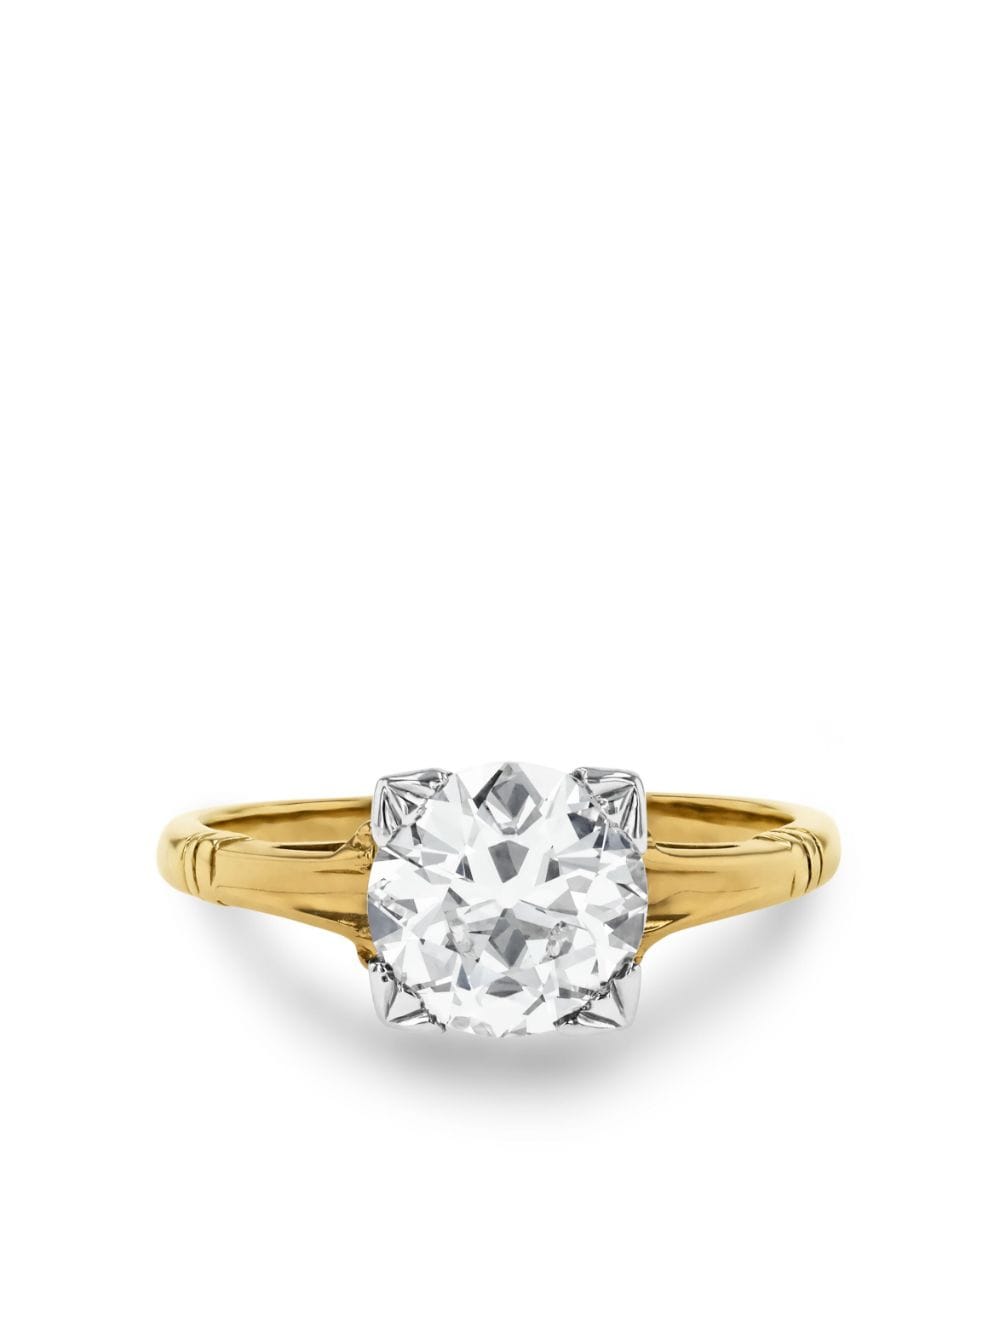 Pre-owned Pragnell Vintage 14kt Yellow Gold Solitaire Diamond Ring